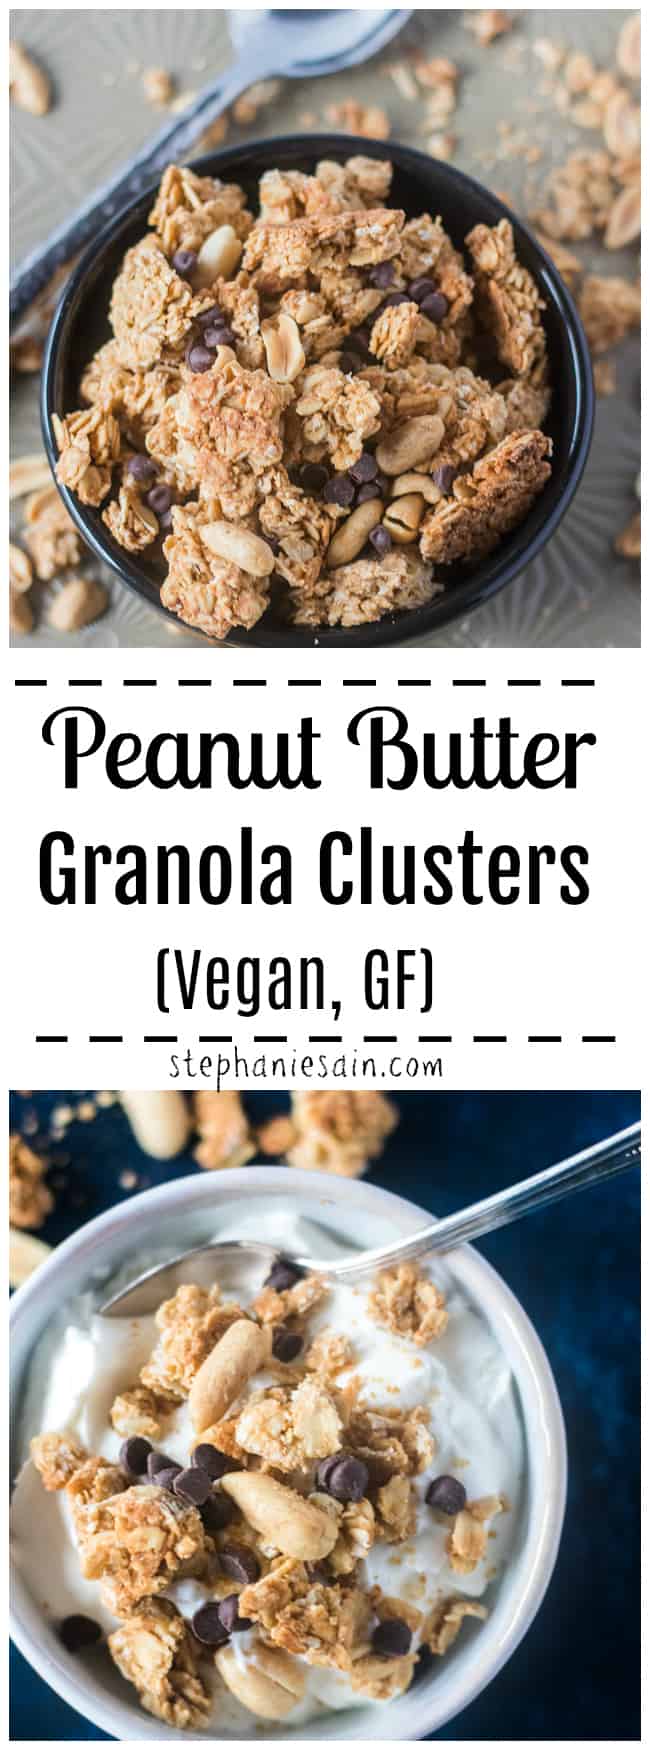 These Peanut Butter Granola Clusters require only five easy to find ingredients. Perfect for an easy, tasty grab and go breakfast or snack. Great also topped on yogurt or served with fresh fruit. Healthy and full of lots of stay with you nutrients. No refined sugar, Gluten Free, & Vegan.